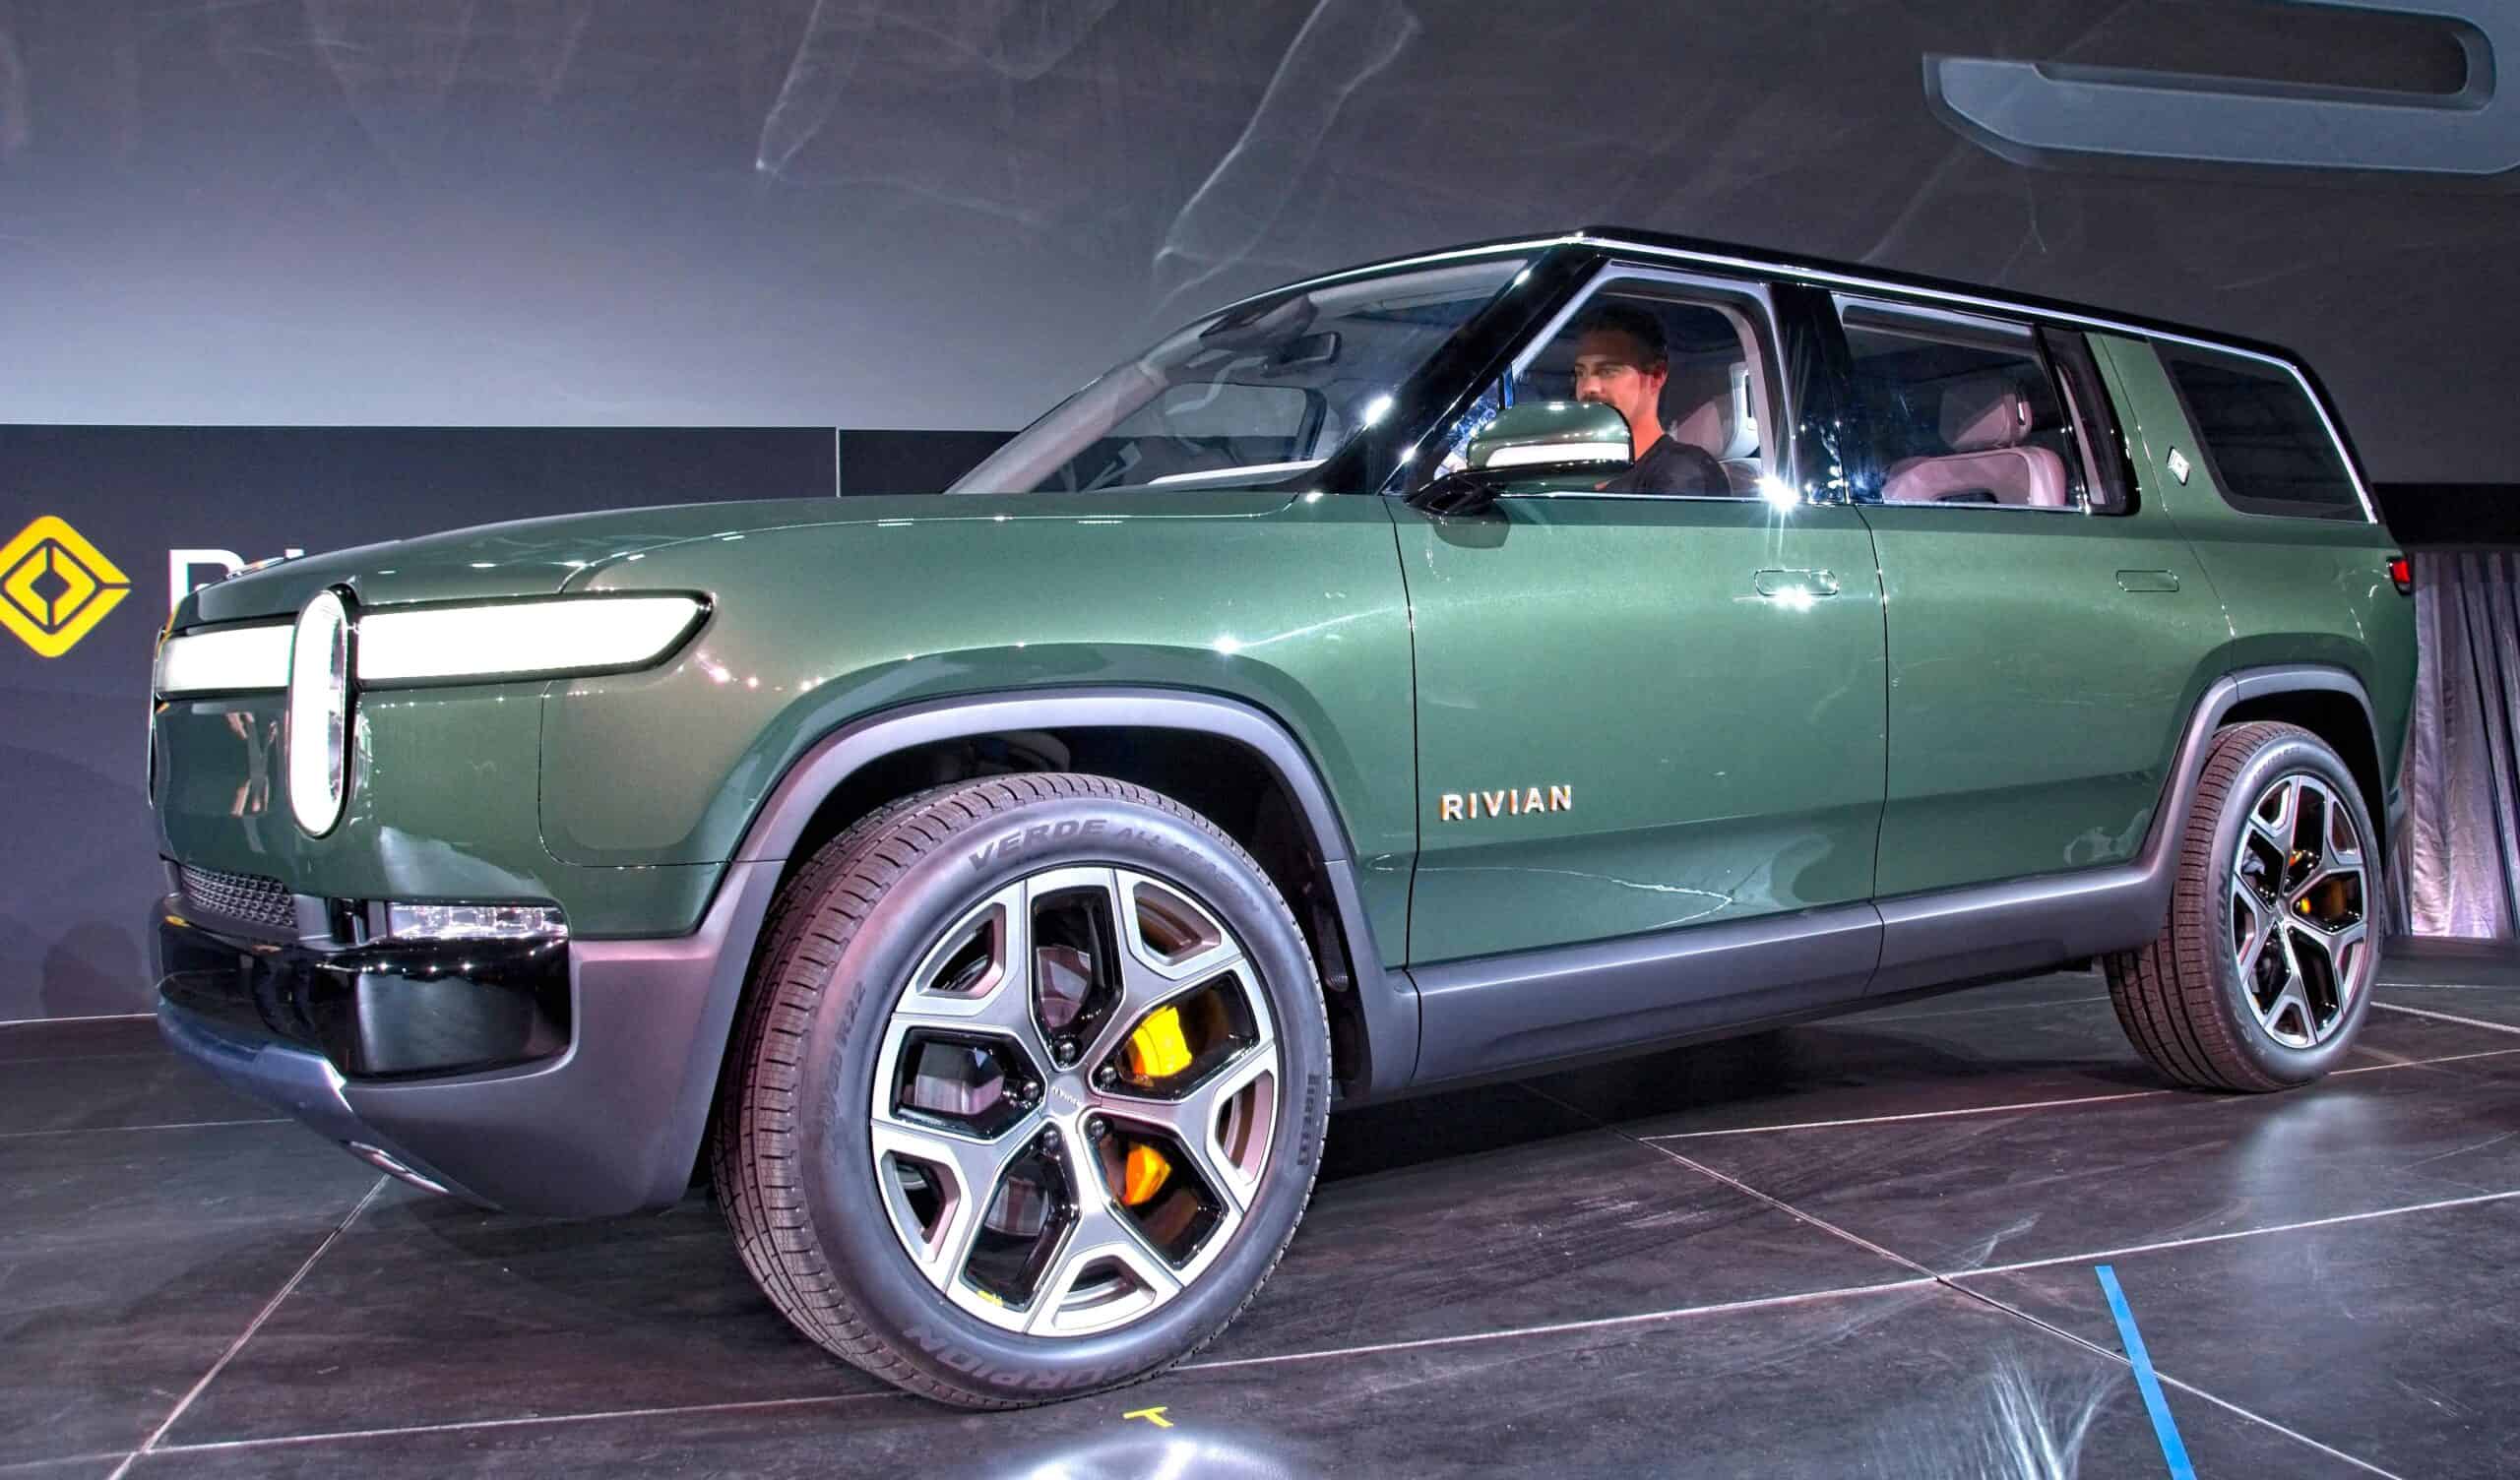 Rivian+R1S | Debut of the Rivian R1S SUV at the 2018 Los Angeles Auto Show, November 27, 2018